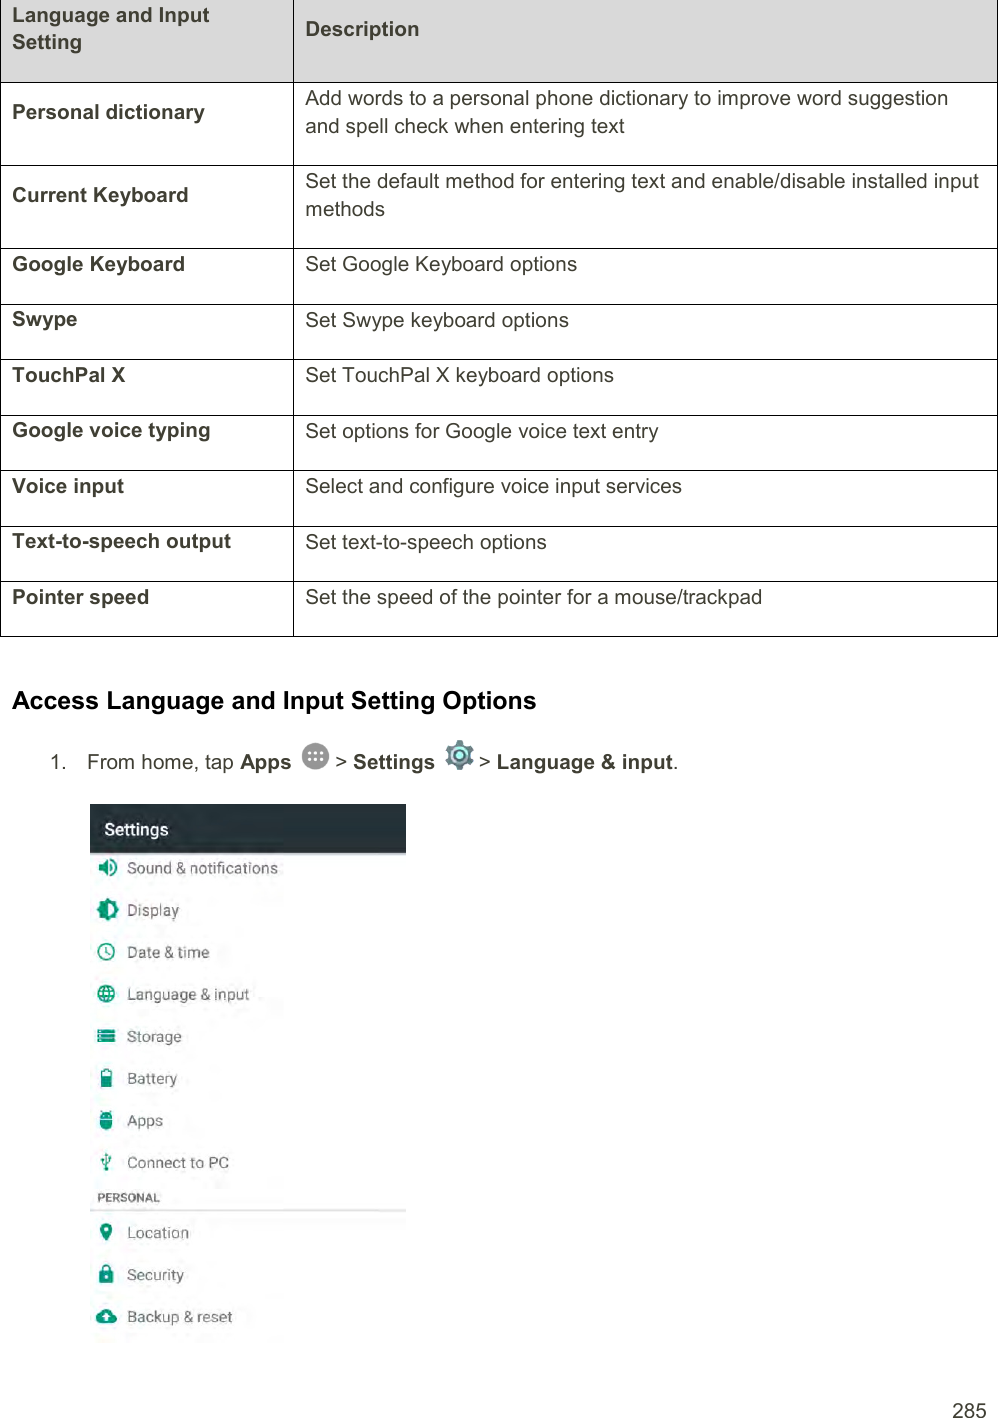  285 Language and Input Setting Description Personal dictionary Add words to a personal phone dictionary to improve word suggestion and spell check when entering text Current Keyboard Set the default method for entering text and enable/disable installed input methods Google Keyboard Set Google Keyboard options Swype Set Swype keyboard options TouchPal X Set TouchPal X keyboard options Google voice typing Set options for Google voice text entry Voice input Select and configure voice input services Text-to-speech output Set text-to-speech options Pointer speed Set the speed of the pointer for a mouse/trackpad  Access Language and Input Setting Options 1.  From home, tap Apps   &gt; Settings   &gt; Language &amp; input.   